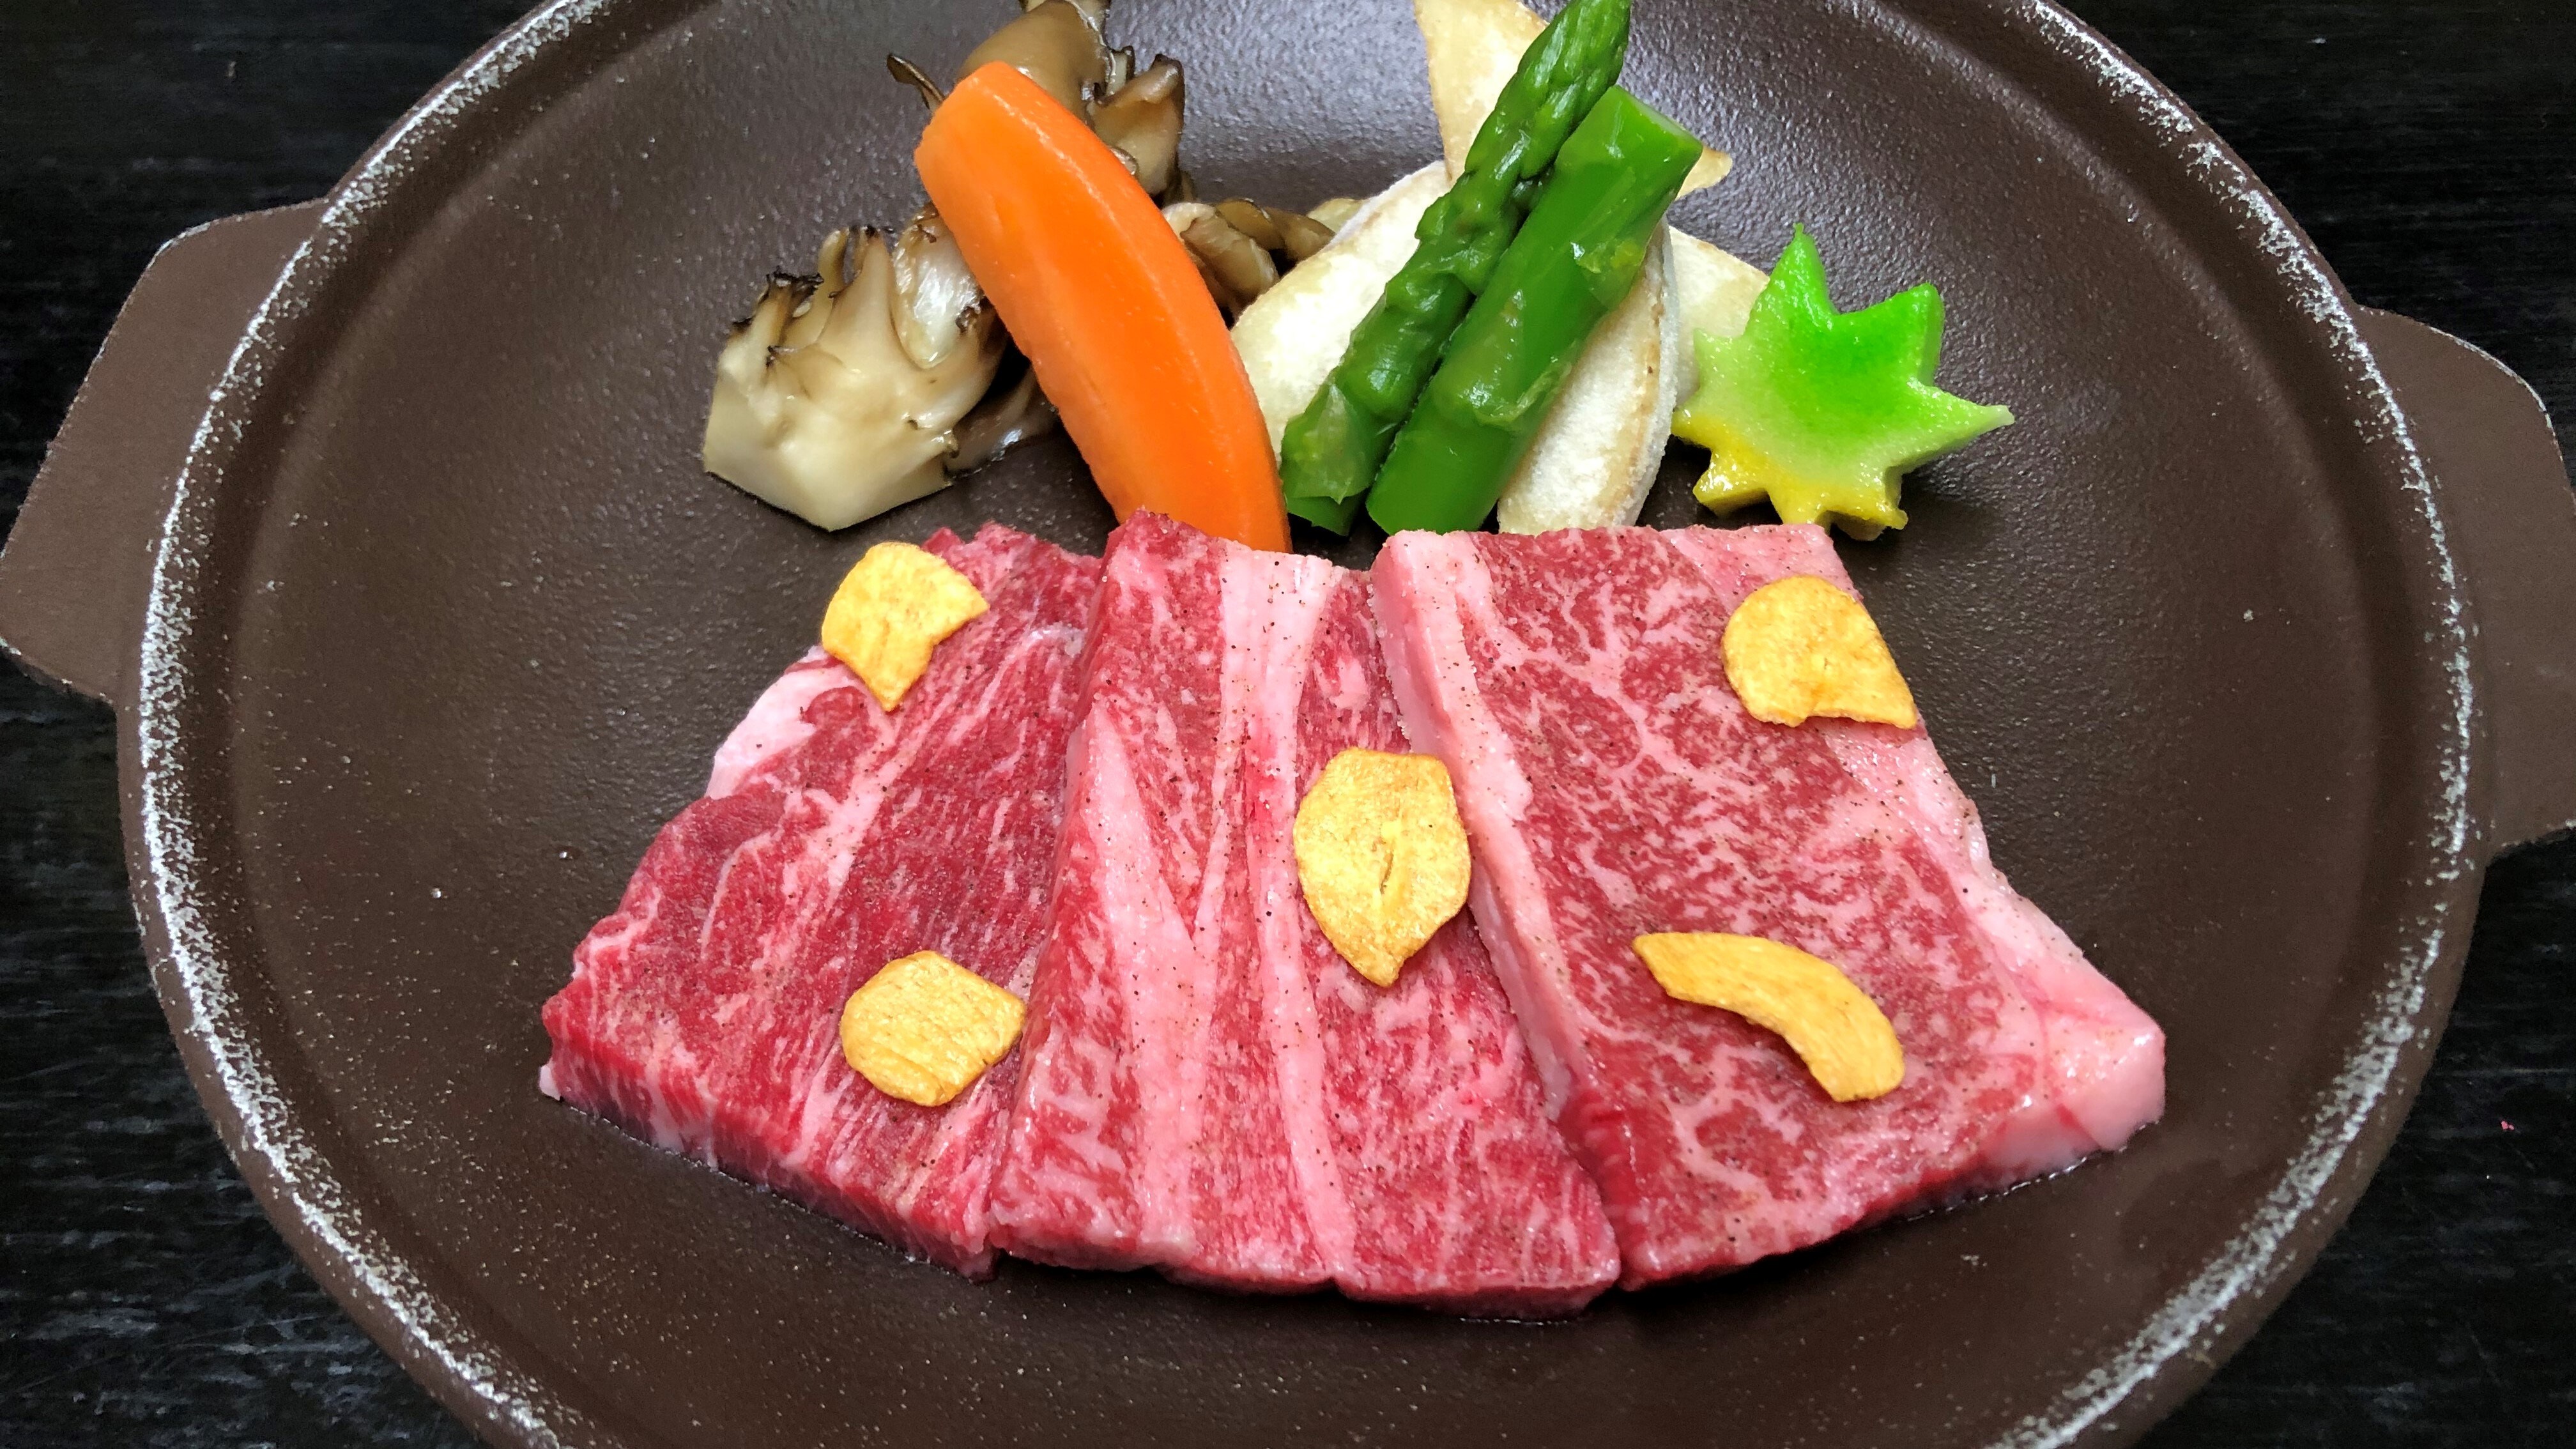 An example of cooking Wagyu beef on a ceramic plate